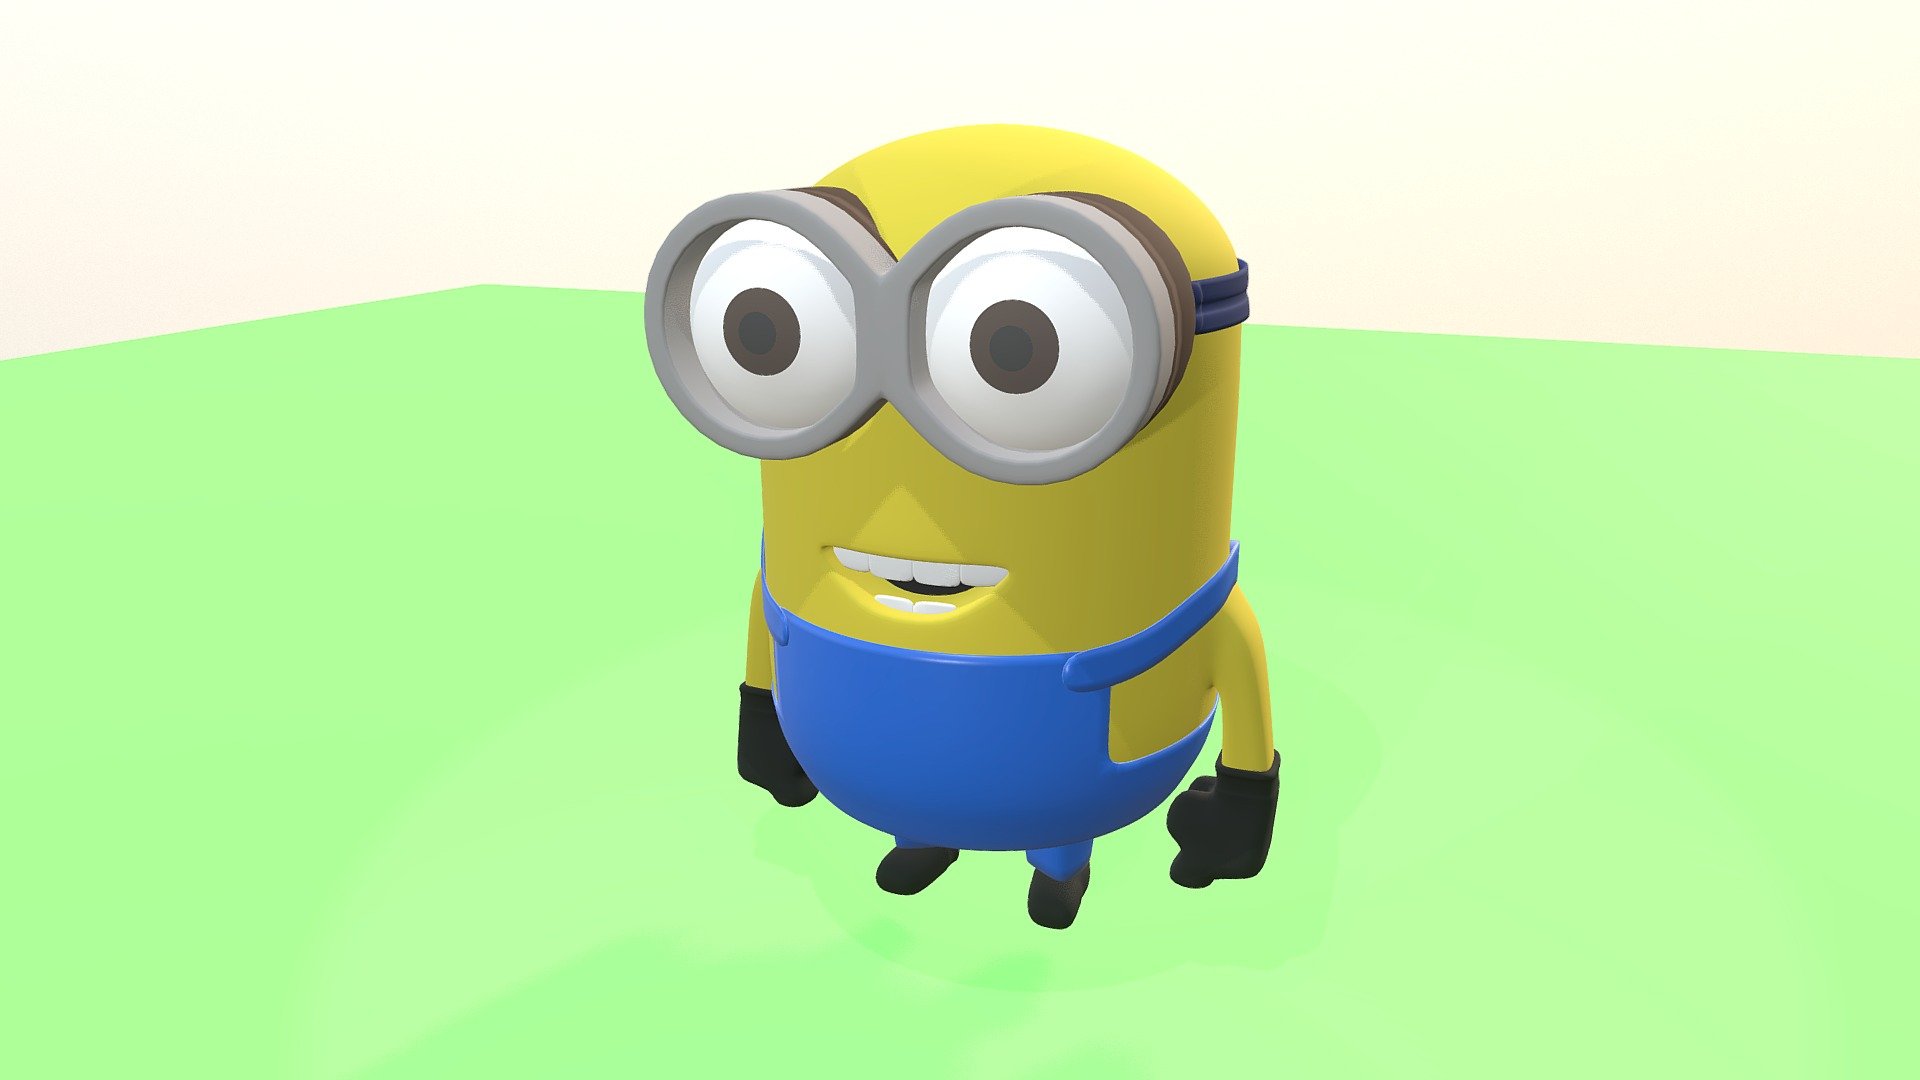 Here goes the charming one. This is my favorite character among all in animation. It has been made in blender and textures have been left out for user to decide upon 3d model